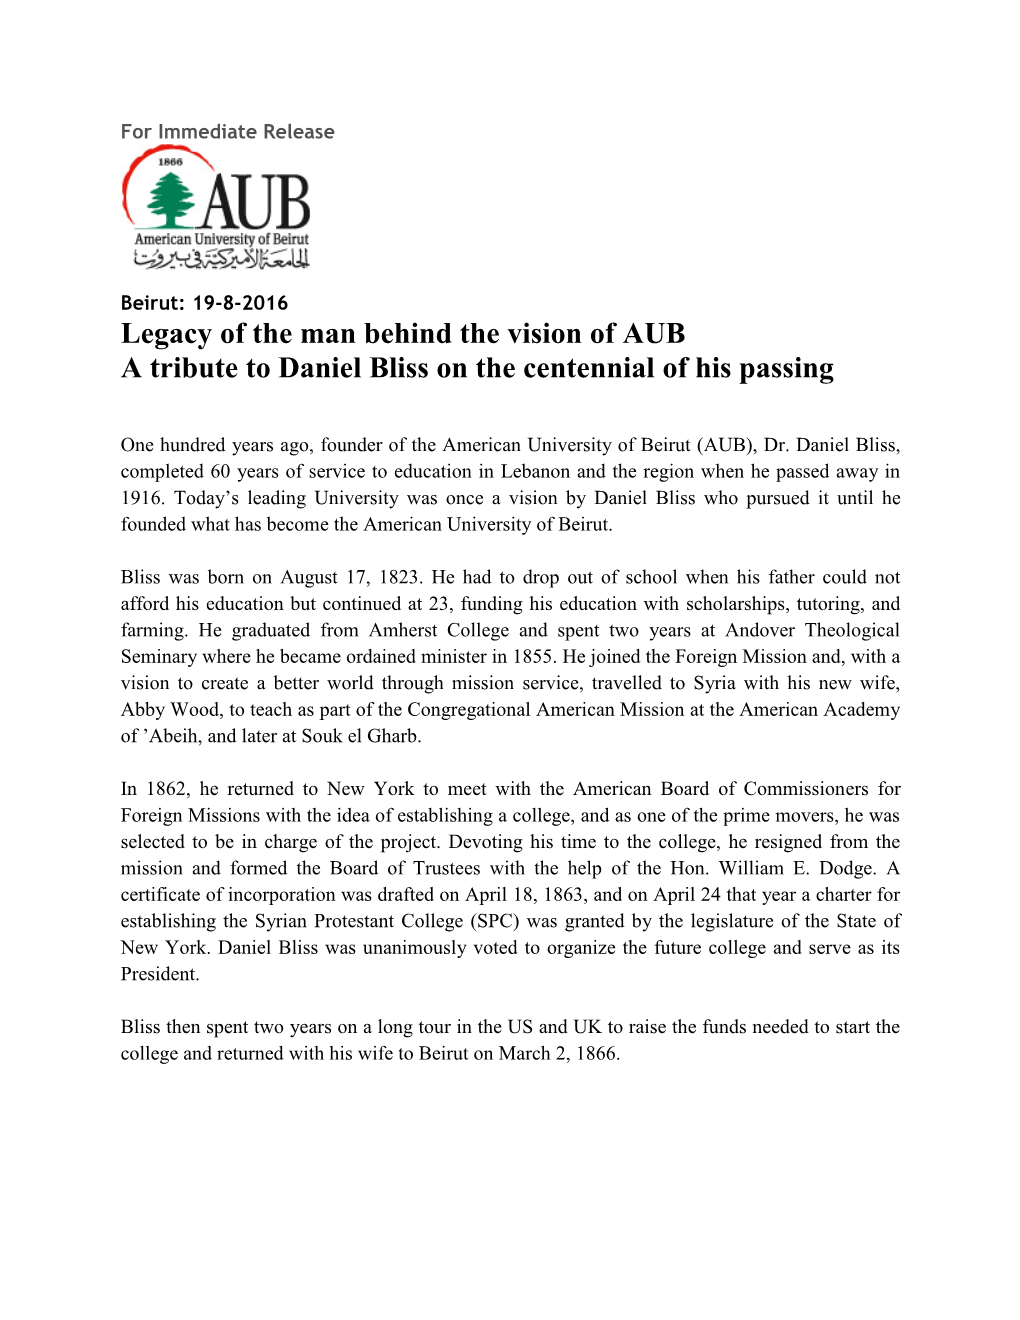 Legacy of the Man Behind the Vision of AUB a Tribute to Daniel Bliss on the Centennial of His Passing